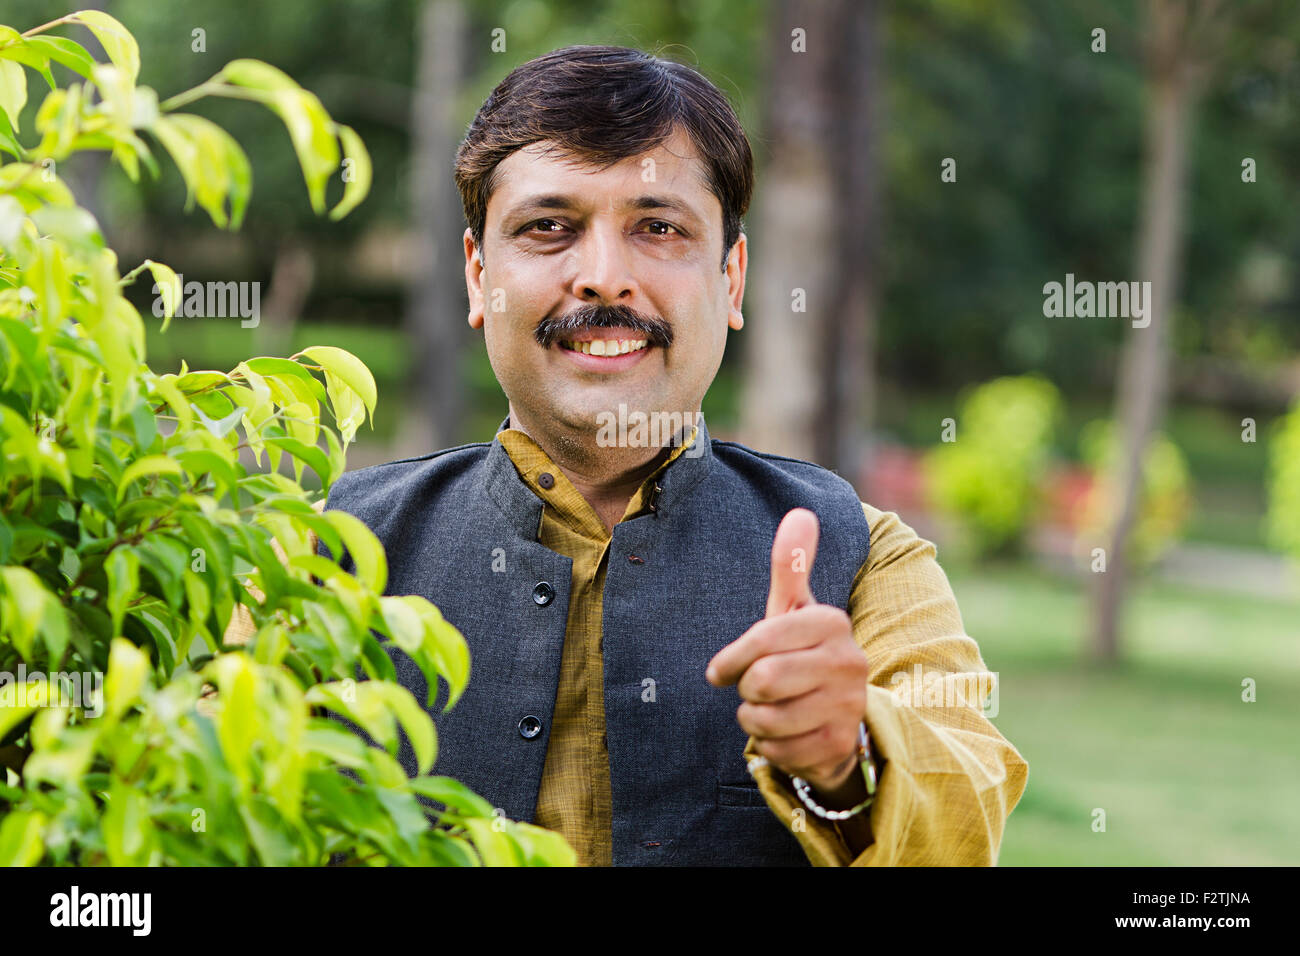 1 indian Adult Man standing Garden Thumbs Up Showing Stock Photo